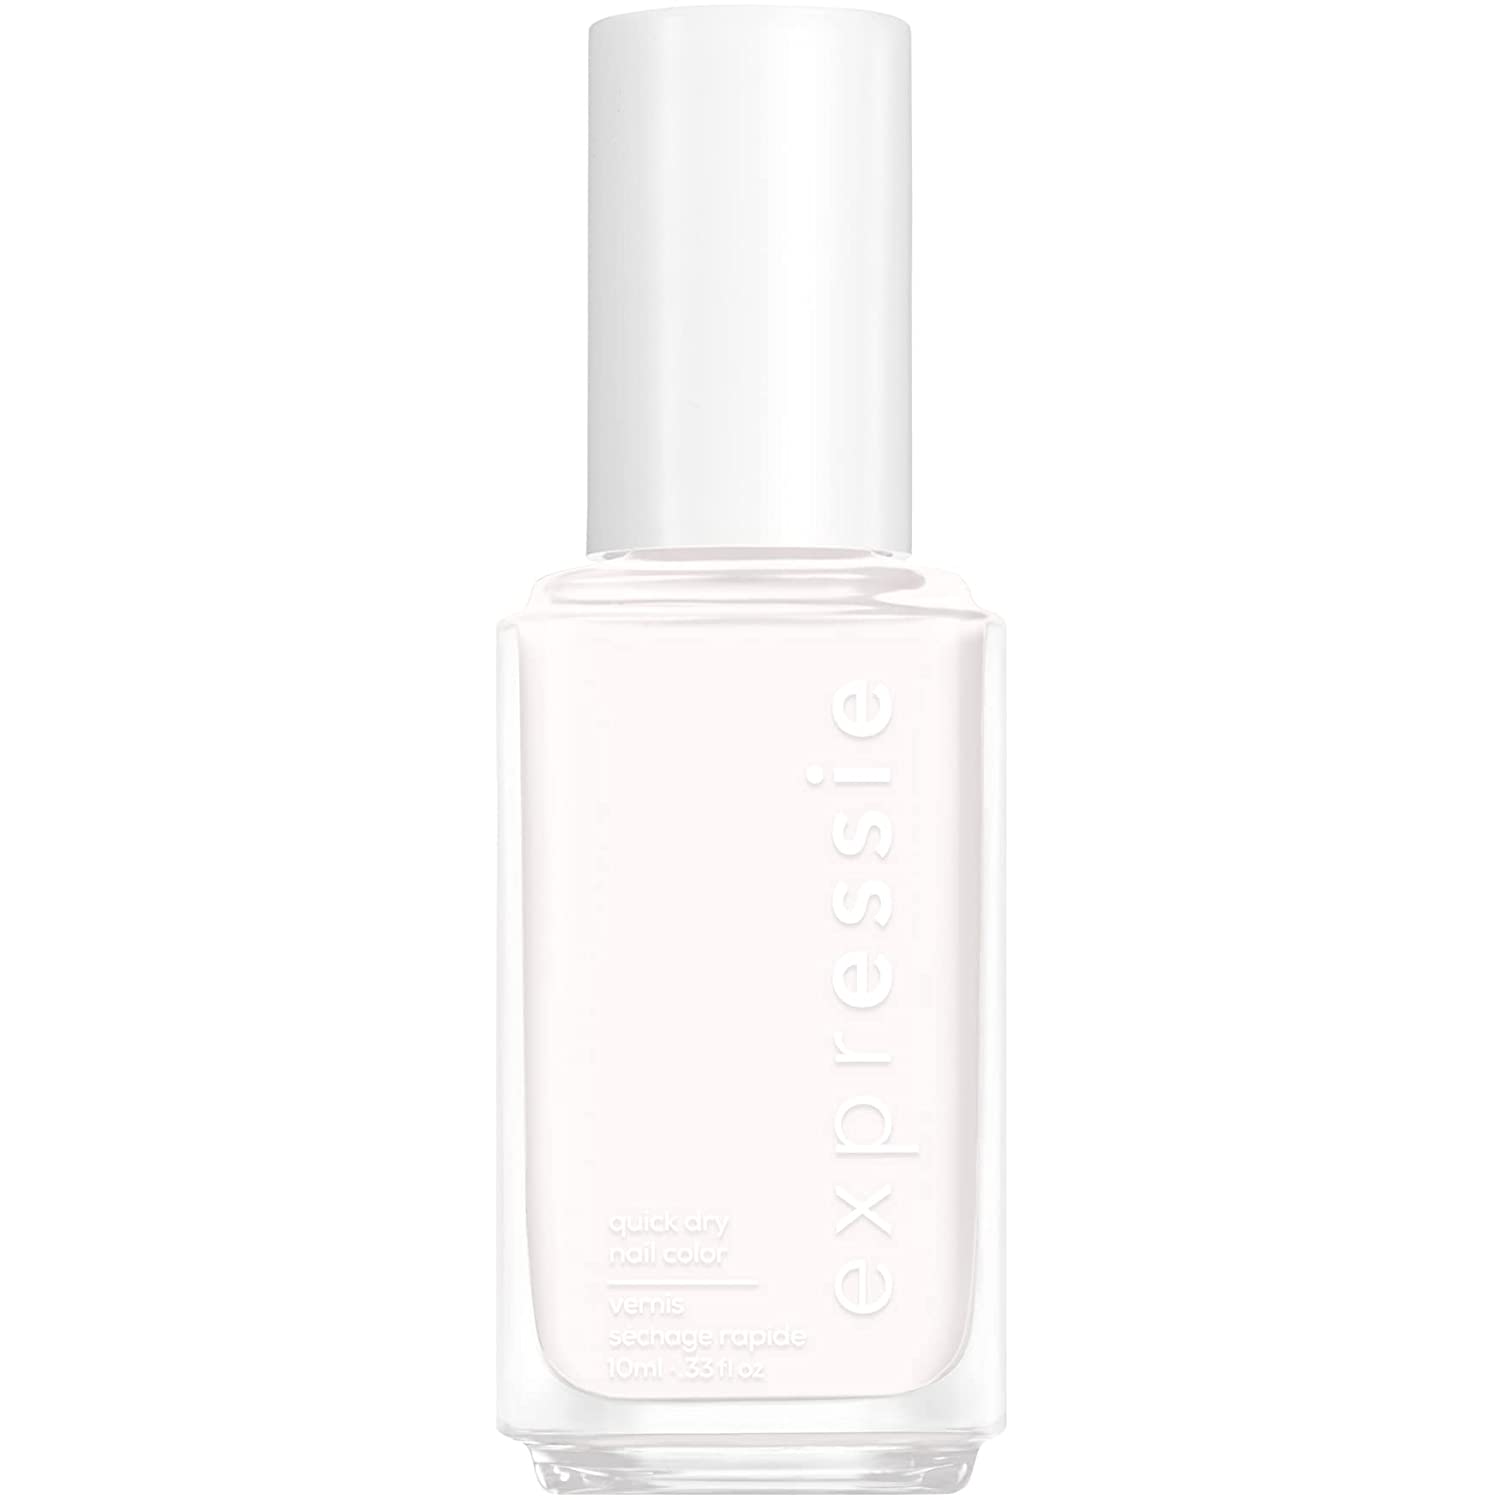 Essie Expressie Quick-Drying Nail Polish in White, No. 500 Unapologetic Icon, Vegan Formula Without Animal Ingredients, icon ‎500